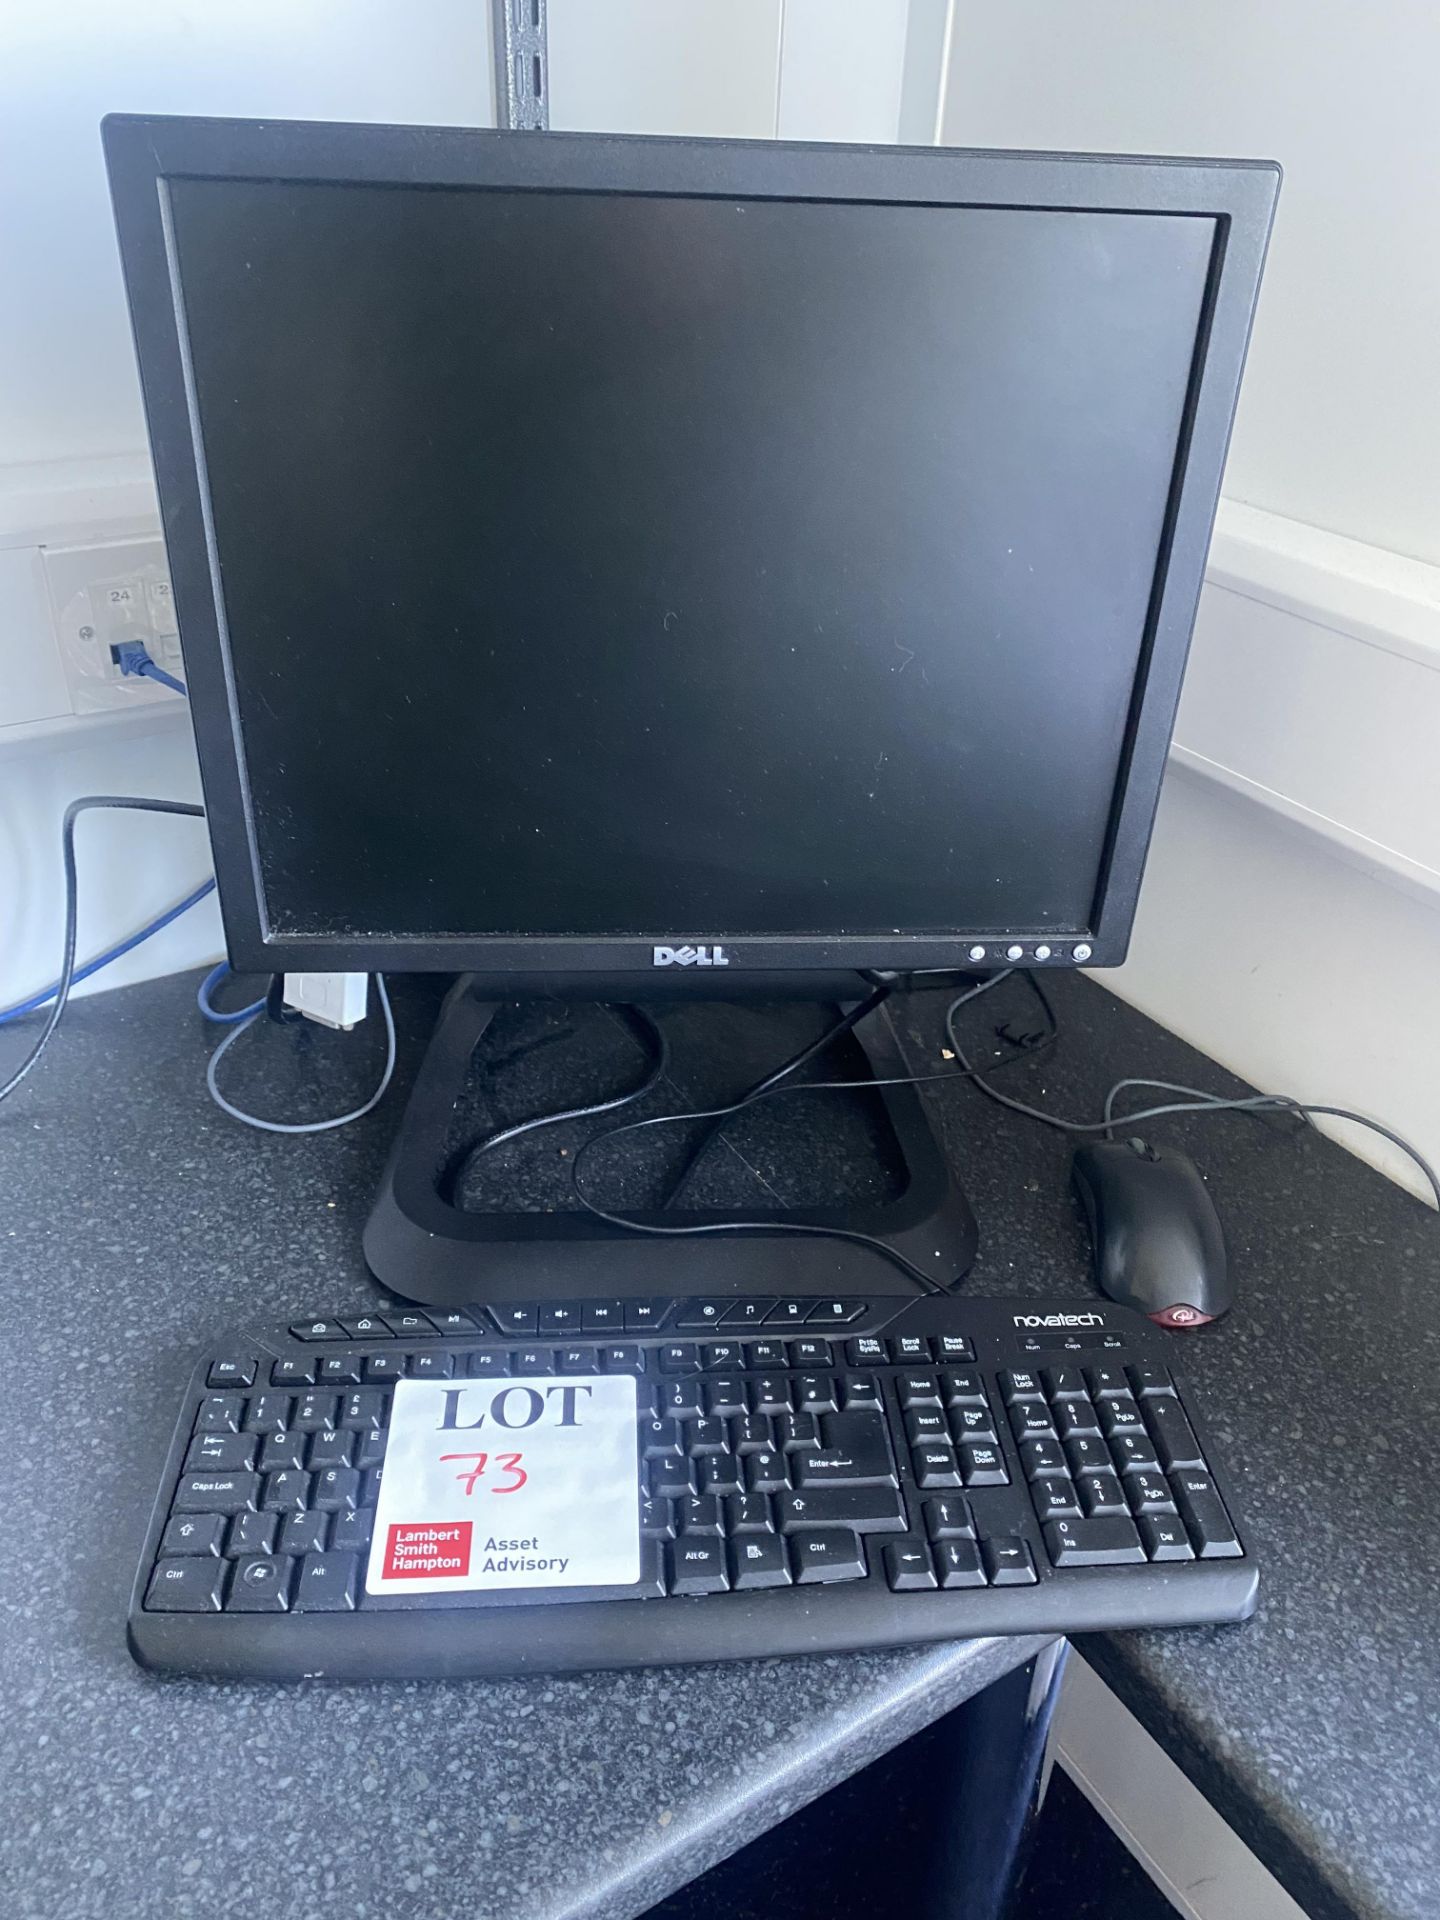 Dell Optiplex 755 PC with Dell monitor, keyboard and mouse